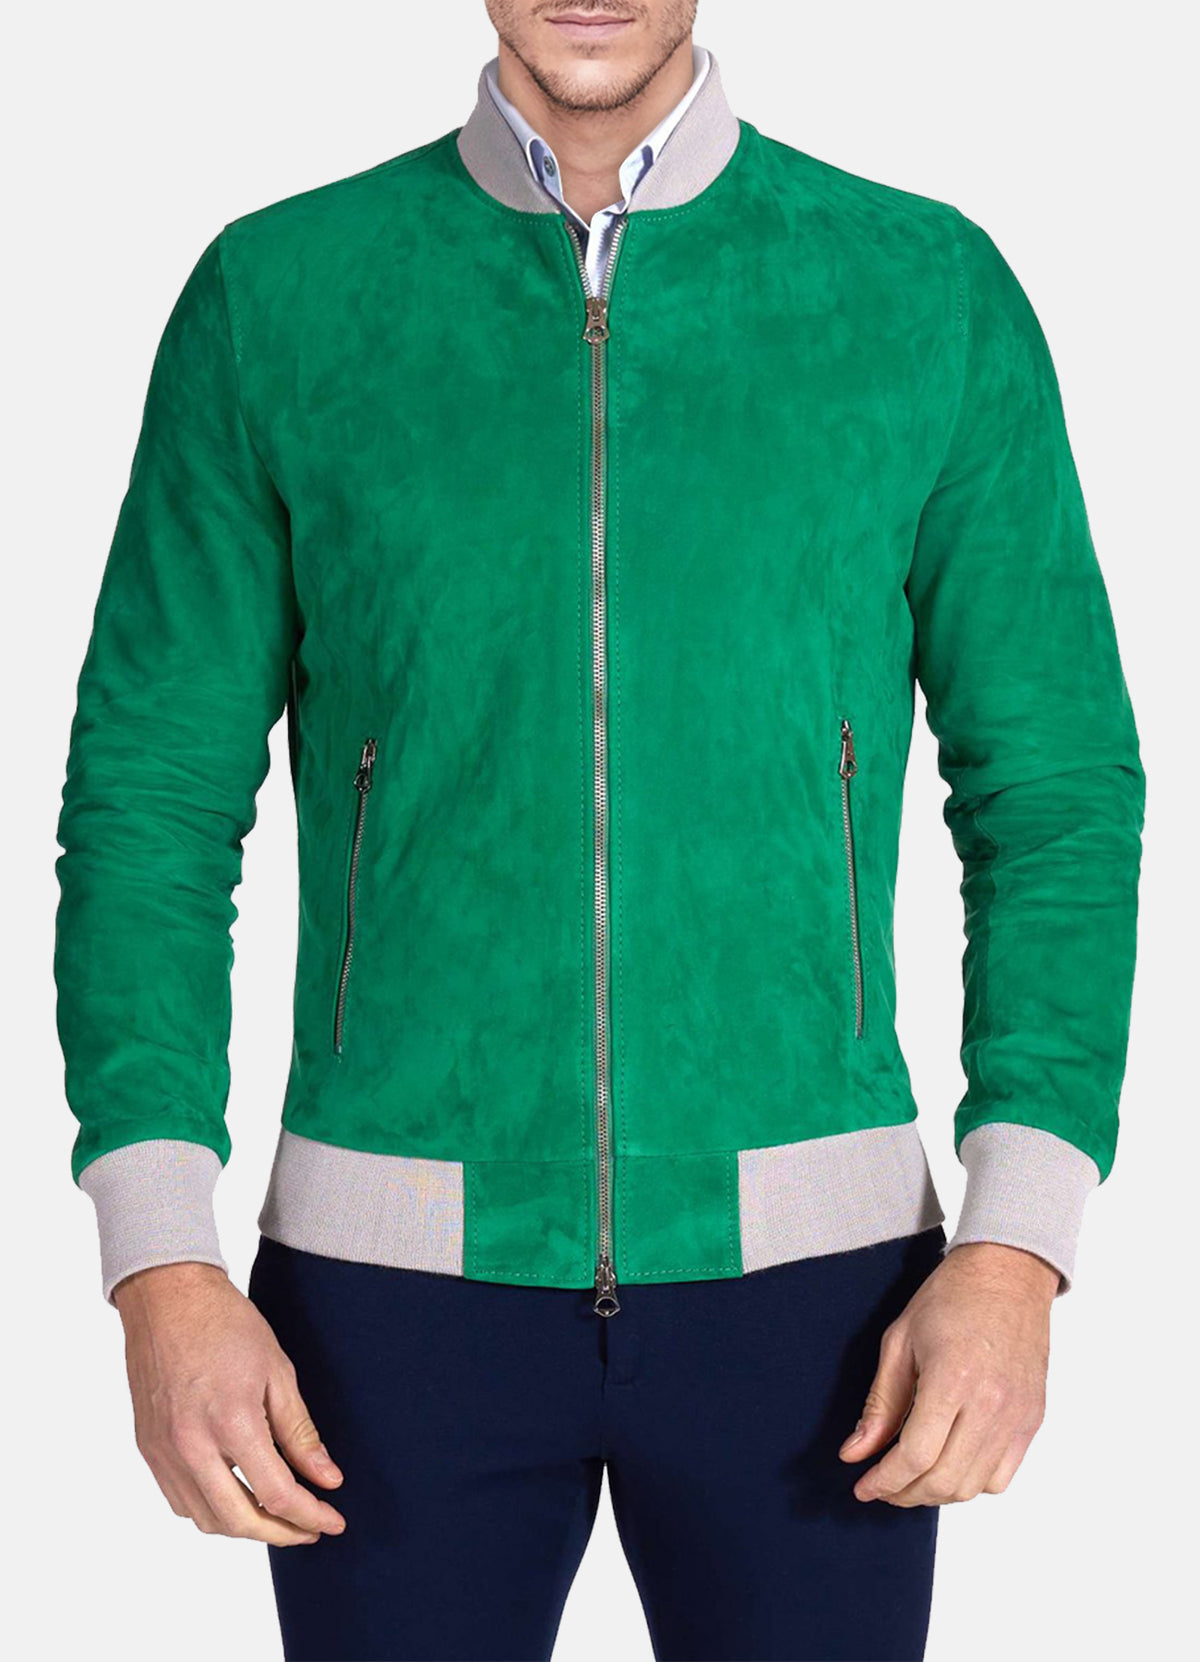 Mens Bright Green Suede Leather Jacket